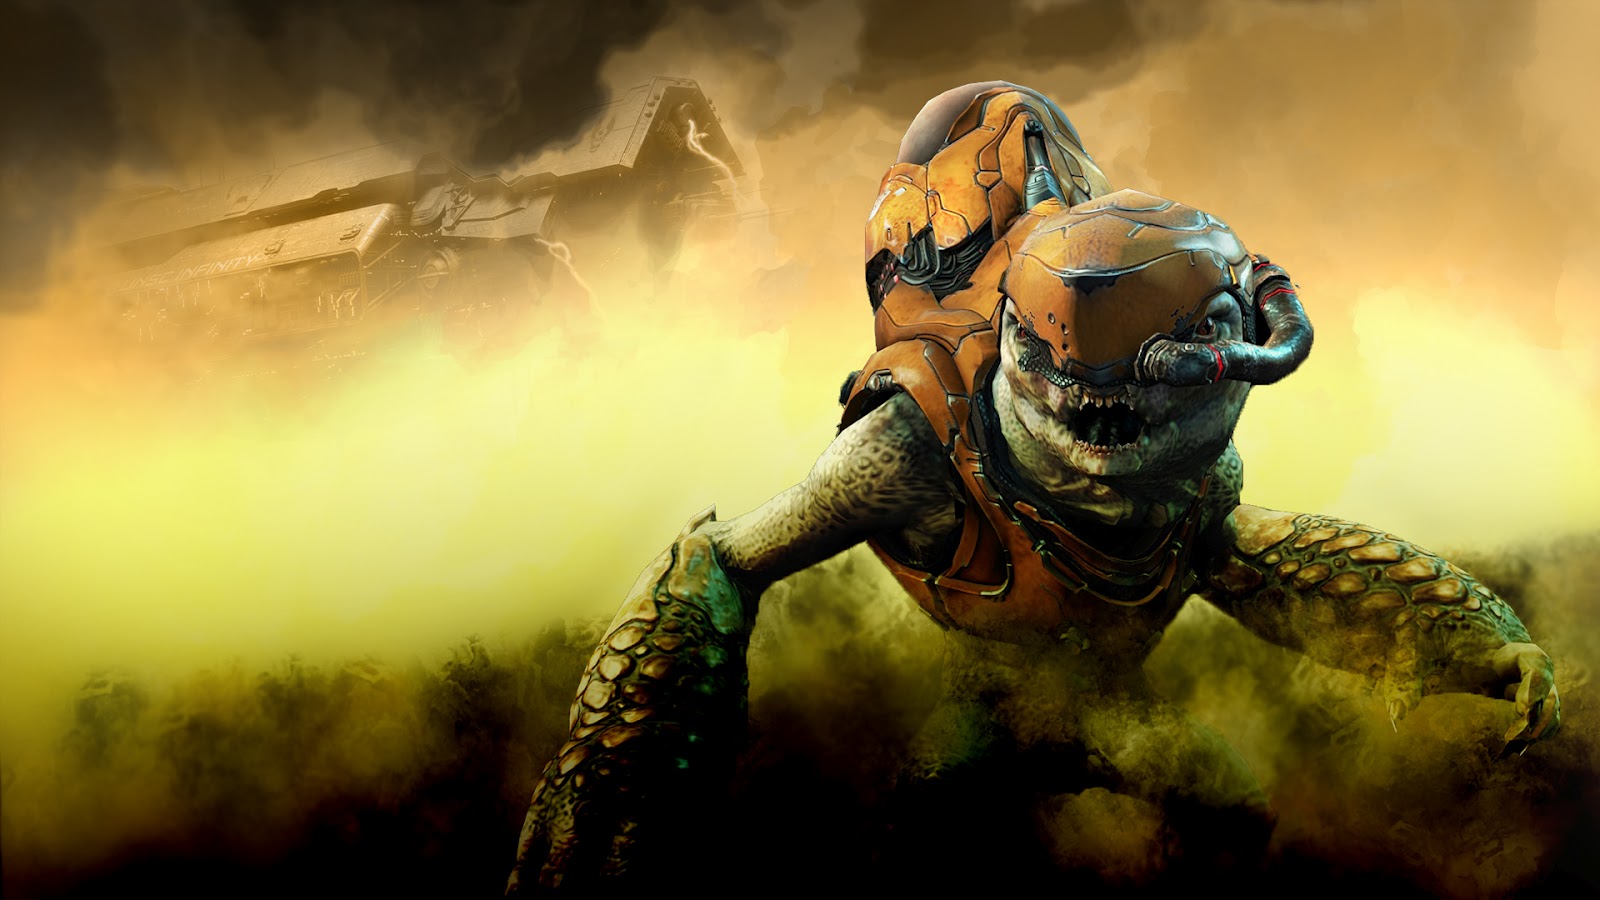 halo 4 pc download free